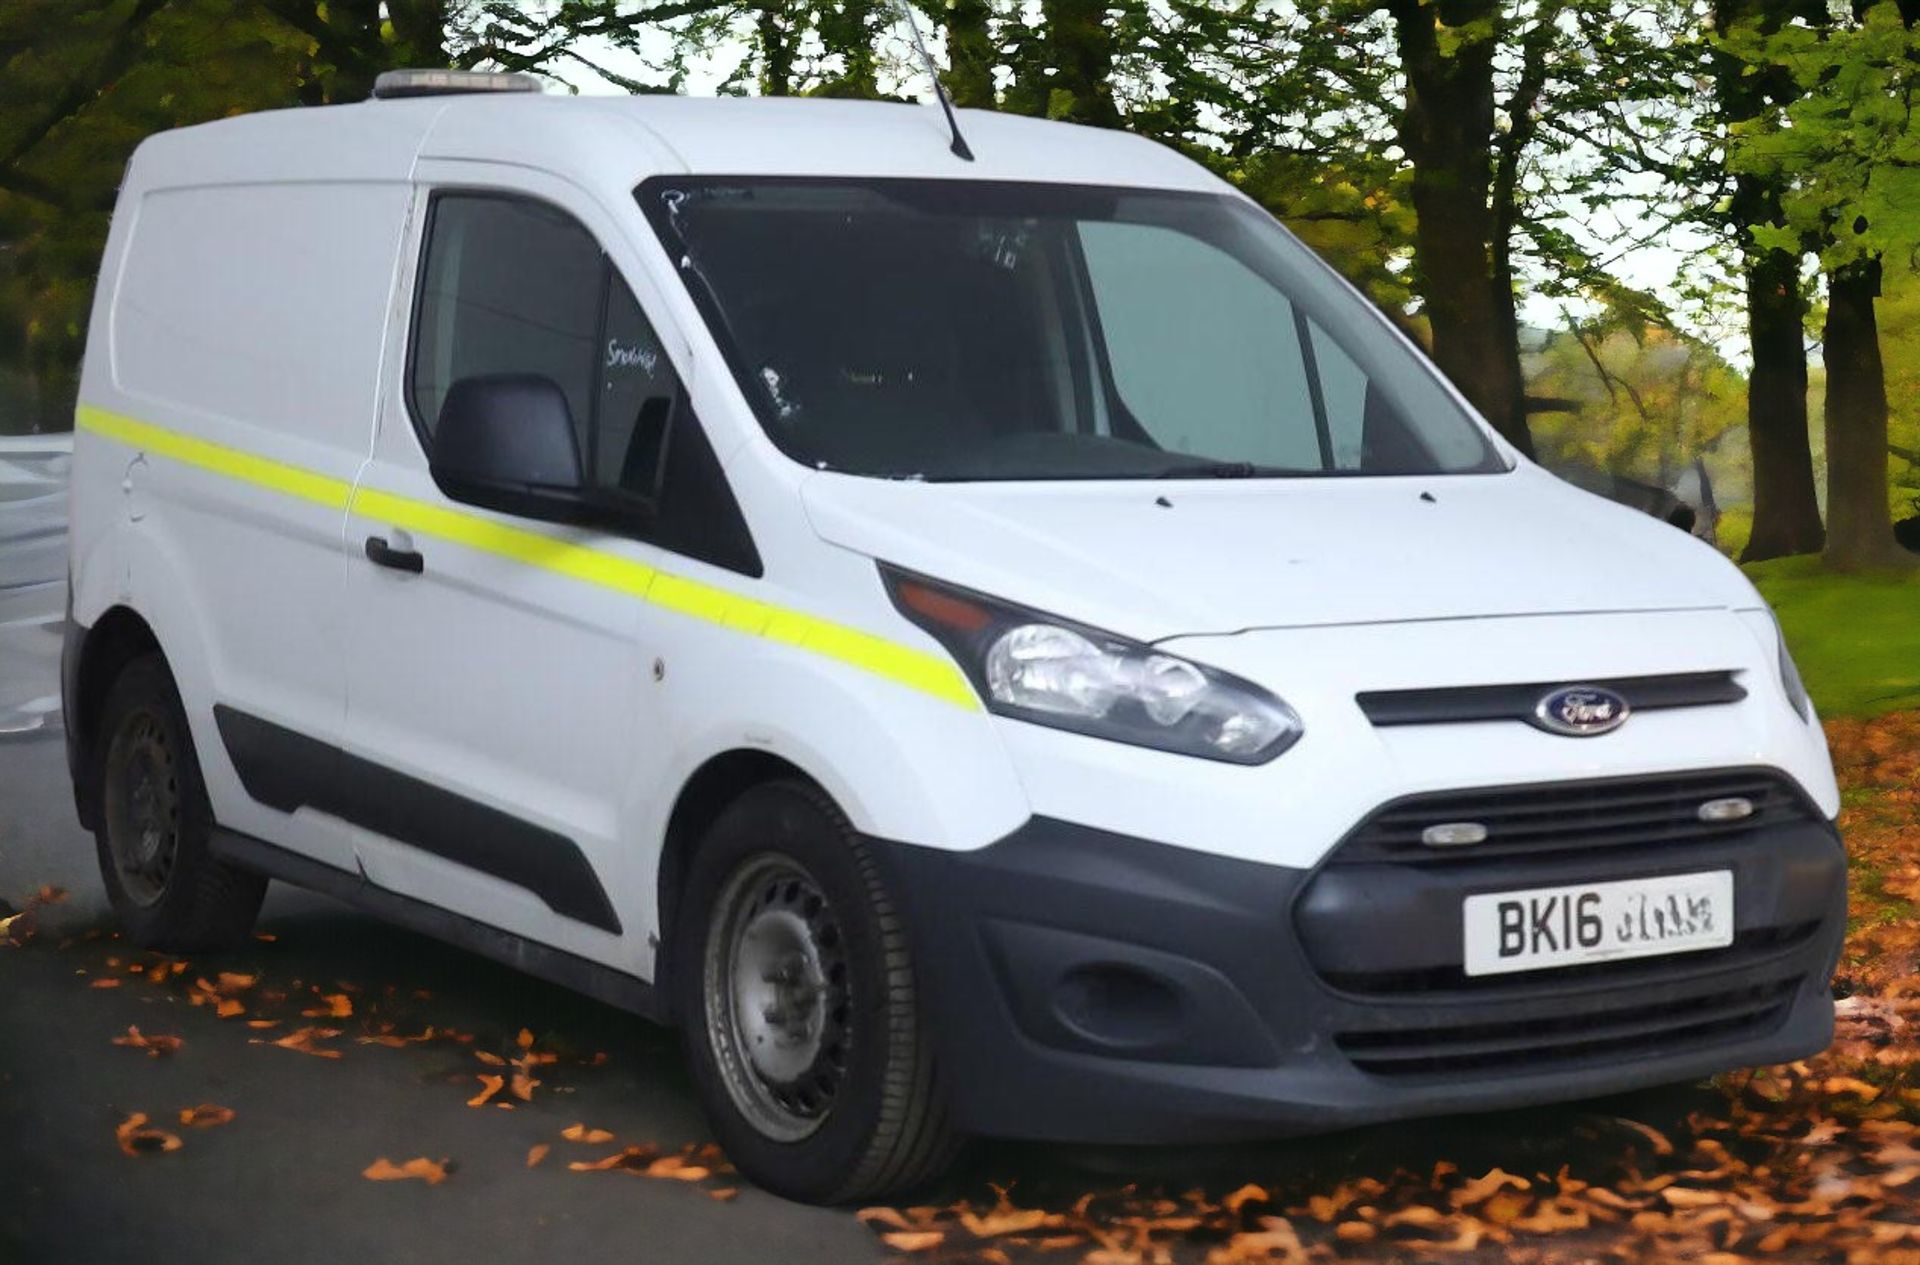 FORD TRANSIT CONNECT ECONETIC SWB PANEL VAN: COMPACT AND EFFICIENT WORKHORSE - Image 2 of 12